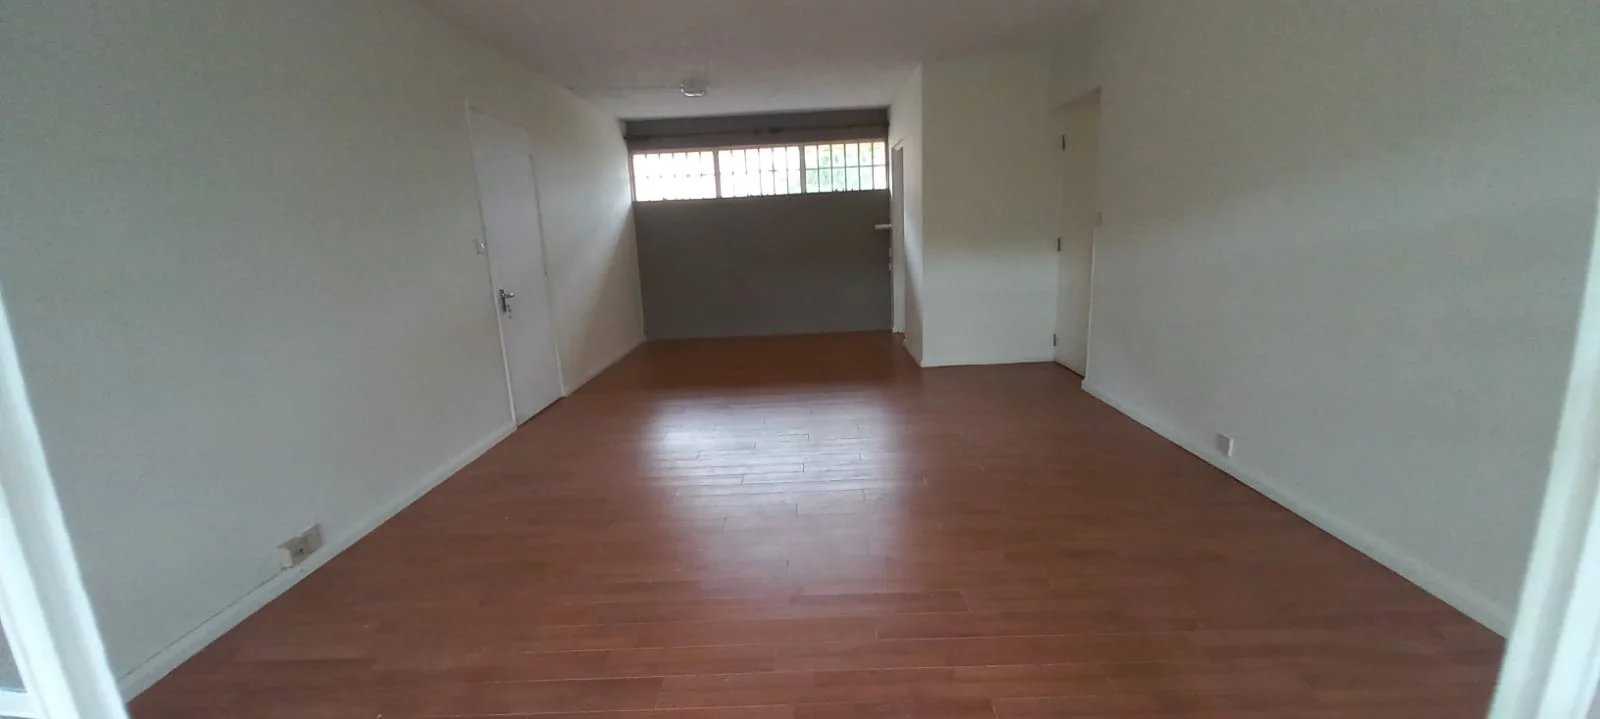 Curepipe  - Appartement 4 Pièces 3 Chambres